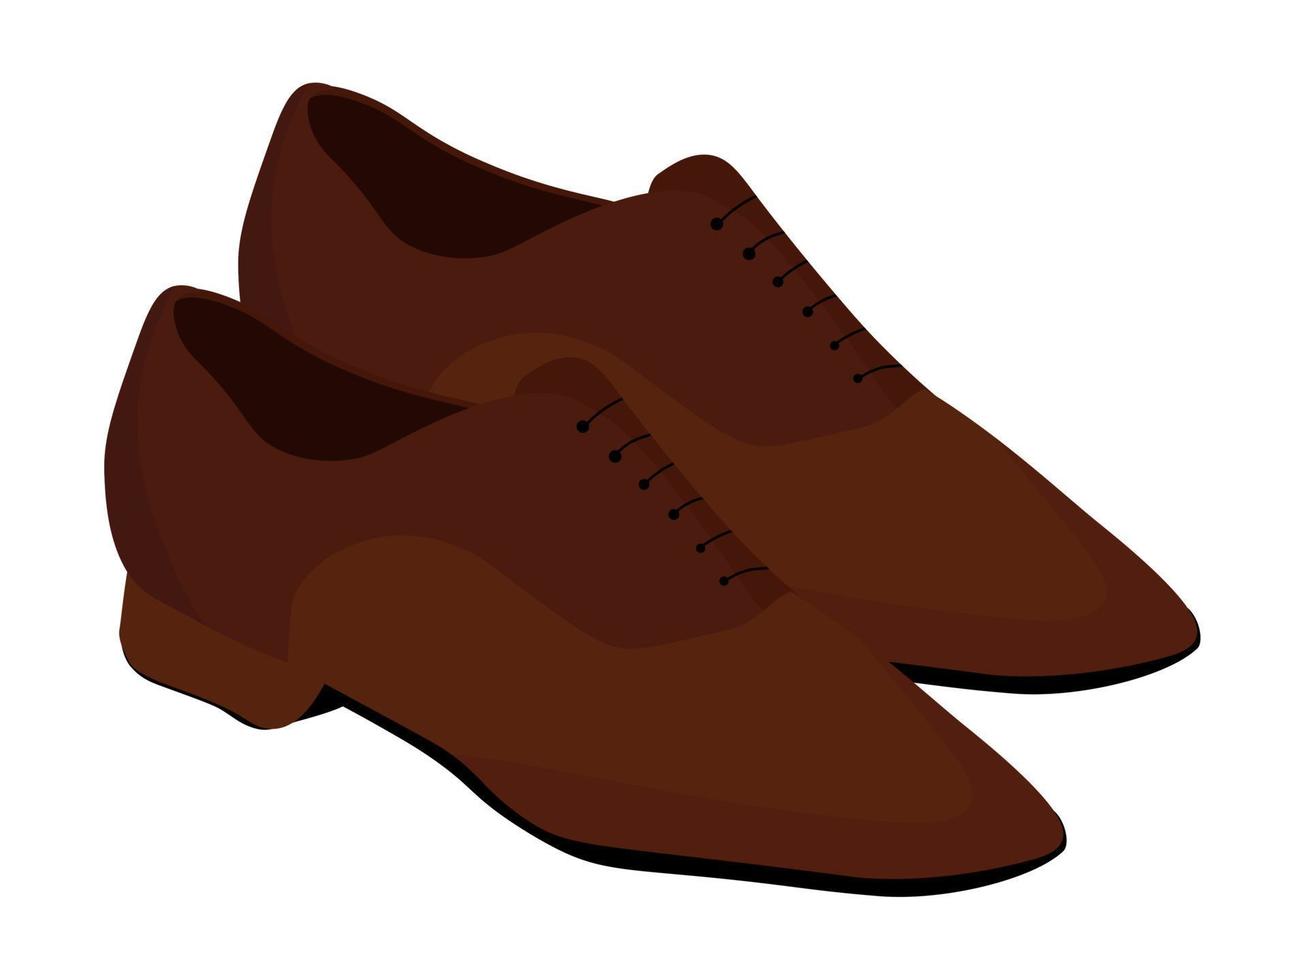 mens brown dance shoes, a pair of dance shoes vector